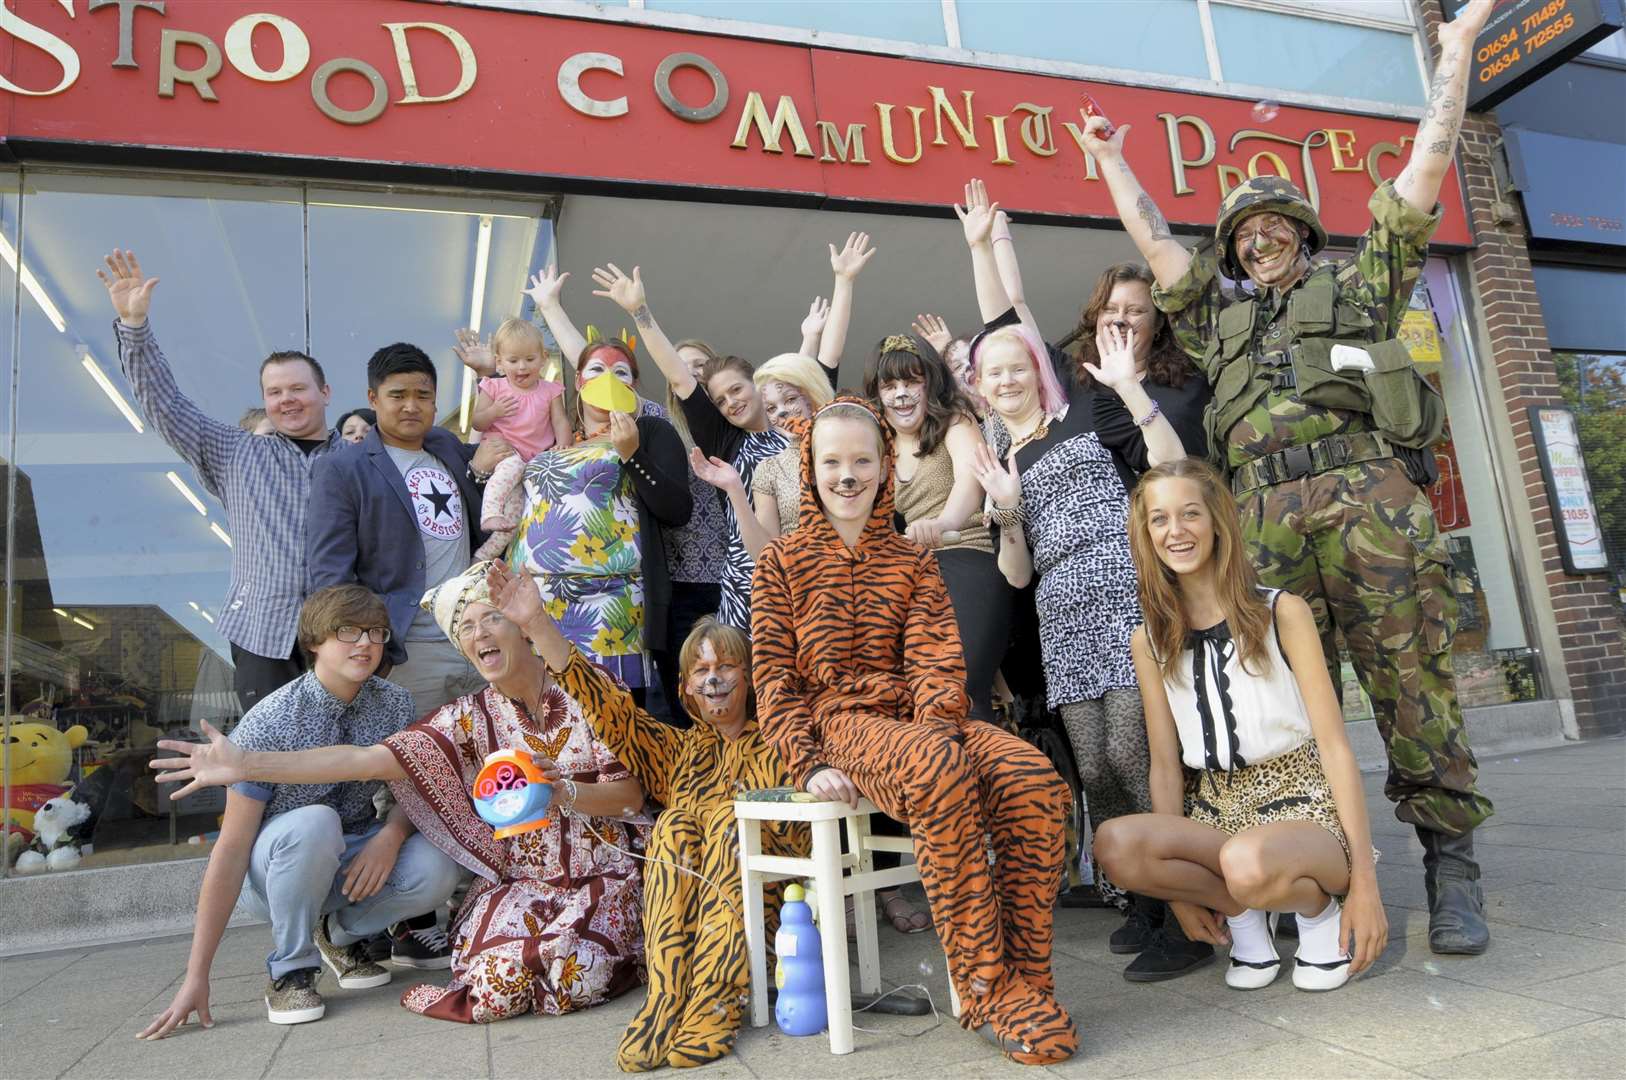 Strood Community Project opened 11 years ago